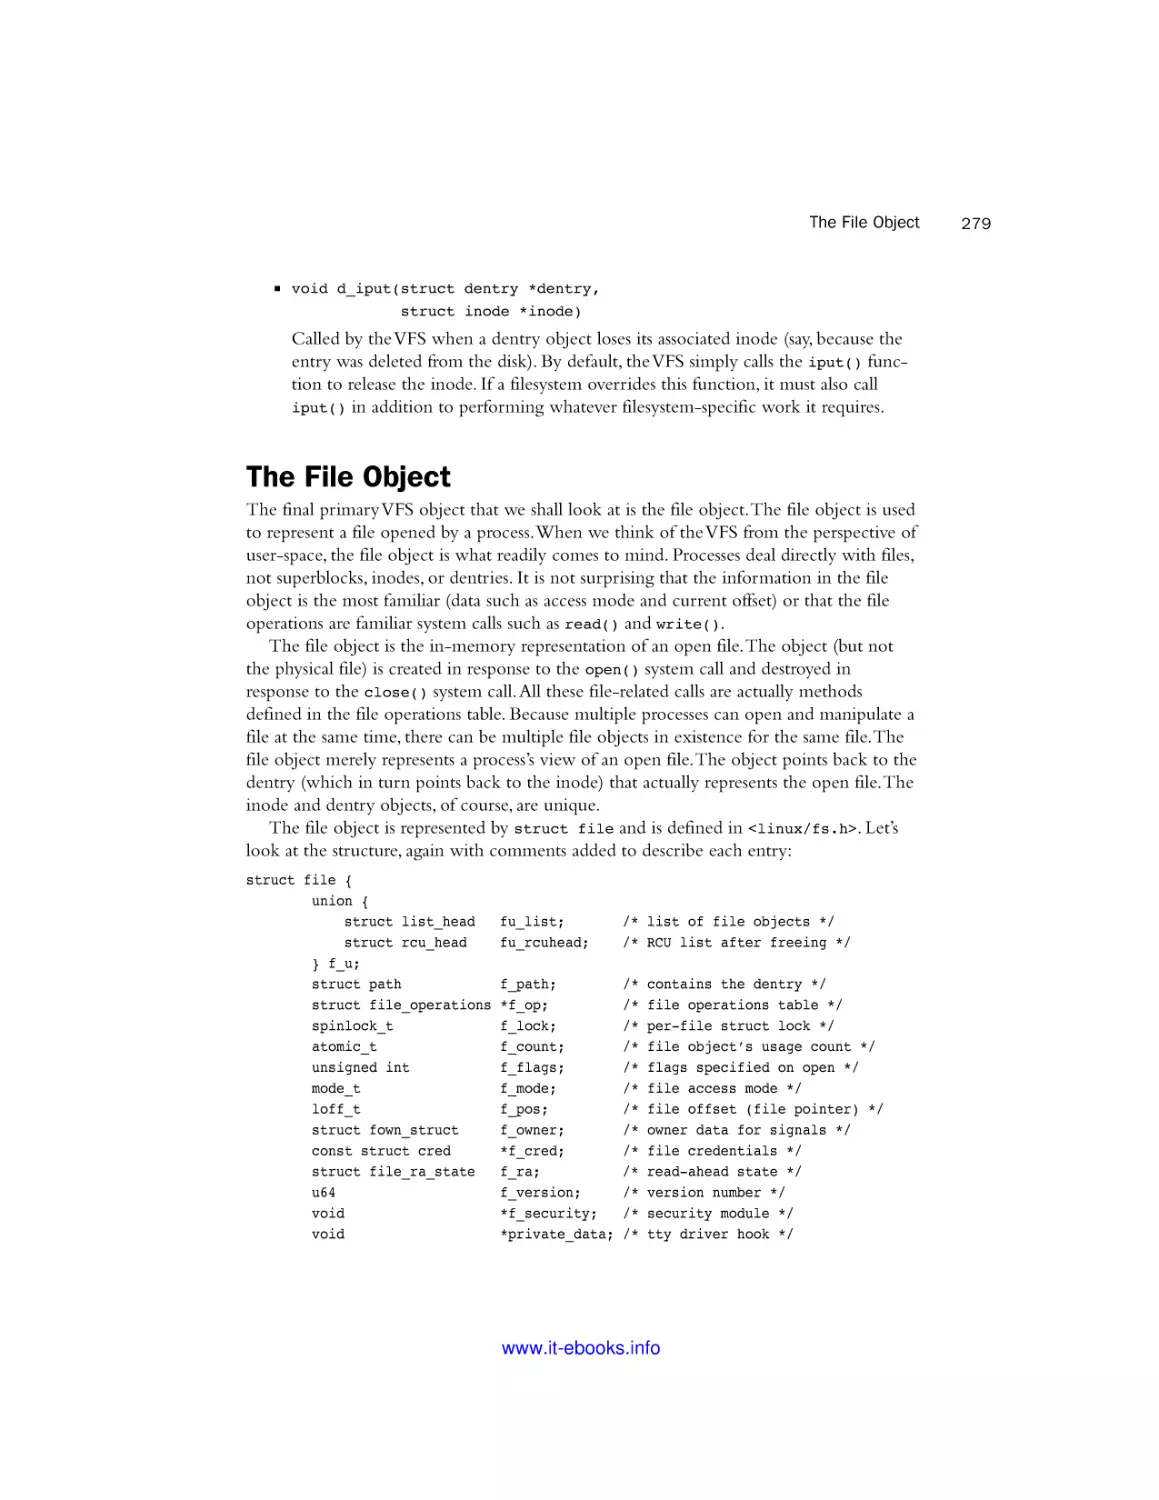 The File Object